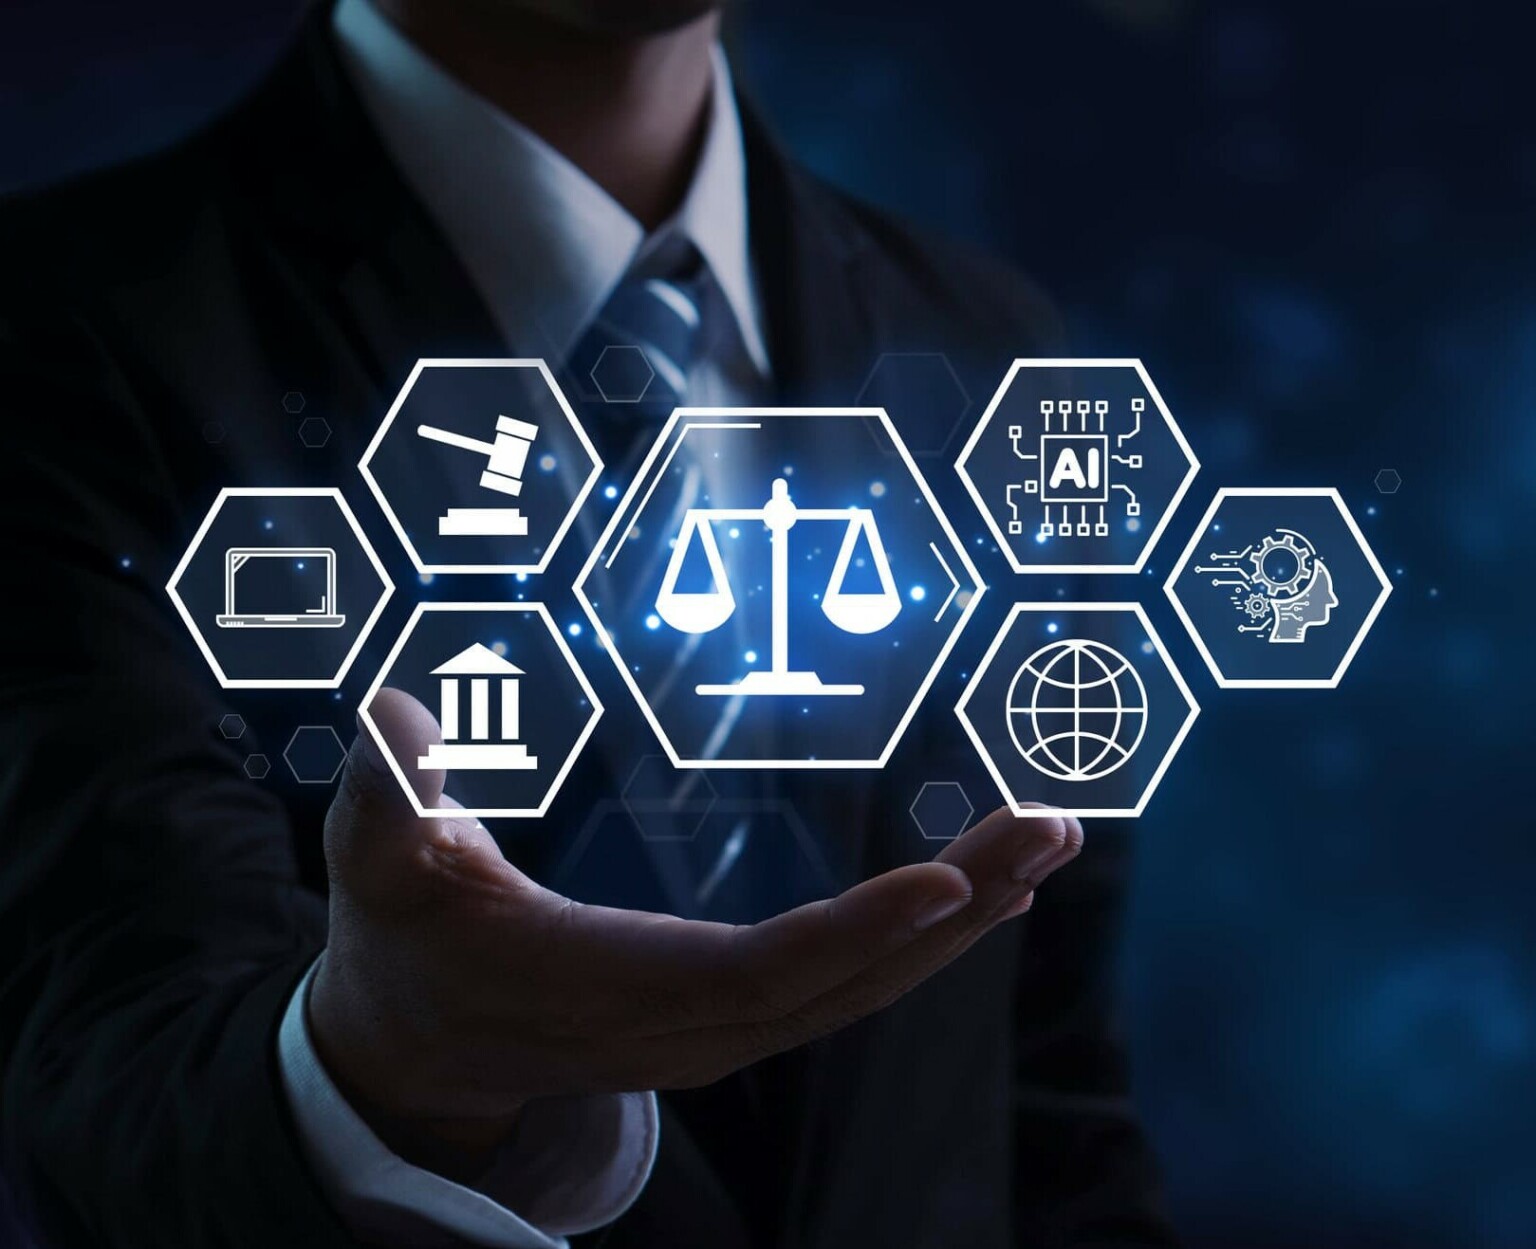 AI Law concept.AI ethics. legislation and regulations of AI Act. legal regulations Controlling artificial intelligence technology is a high risk. Virtual lawyer, legal service online.AI Law concept.AI ethics. legislation and regulations of AI Act. legal regulations Controlling artificial intelligence technology is a high risk. Virtual lawyer, legal service online, cyber law, digital law.